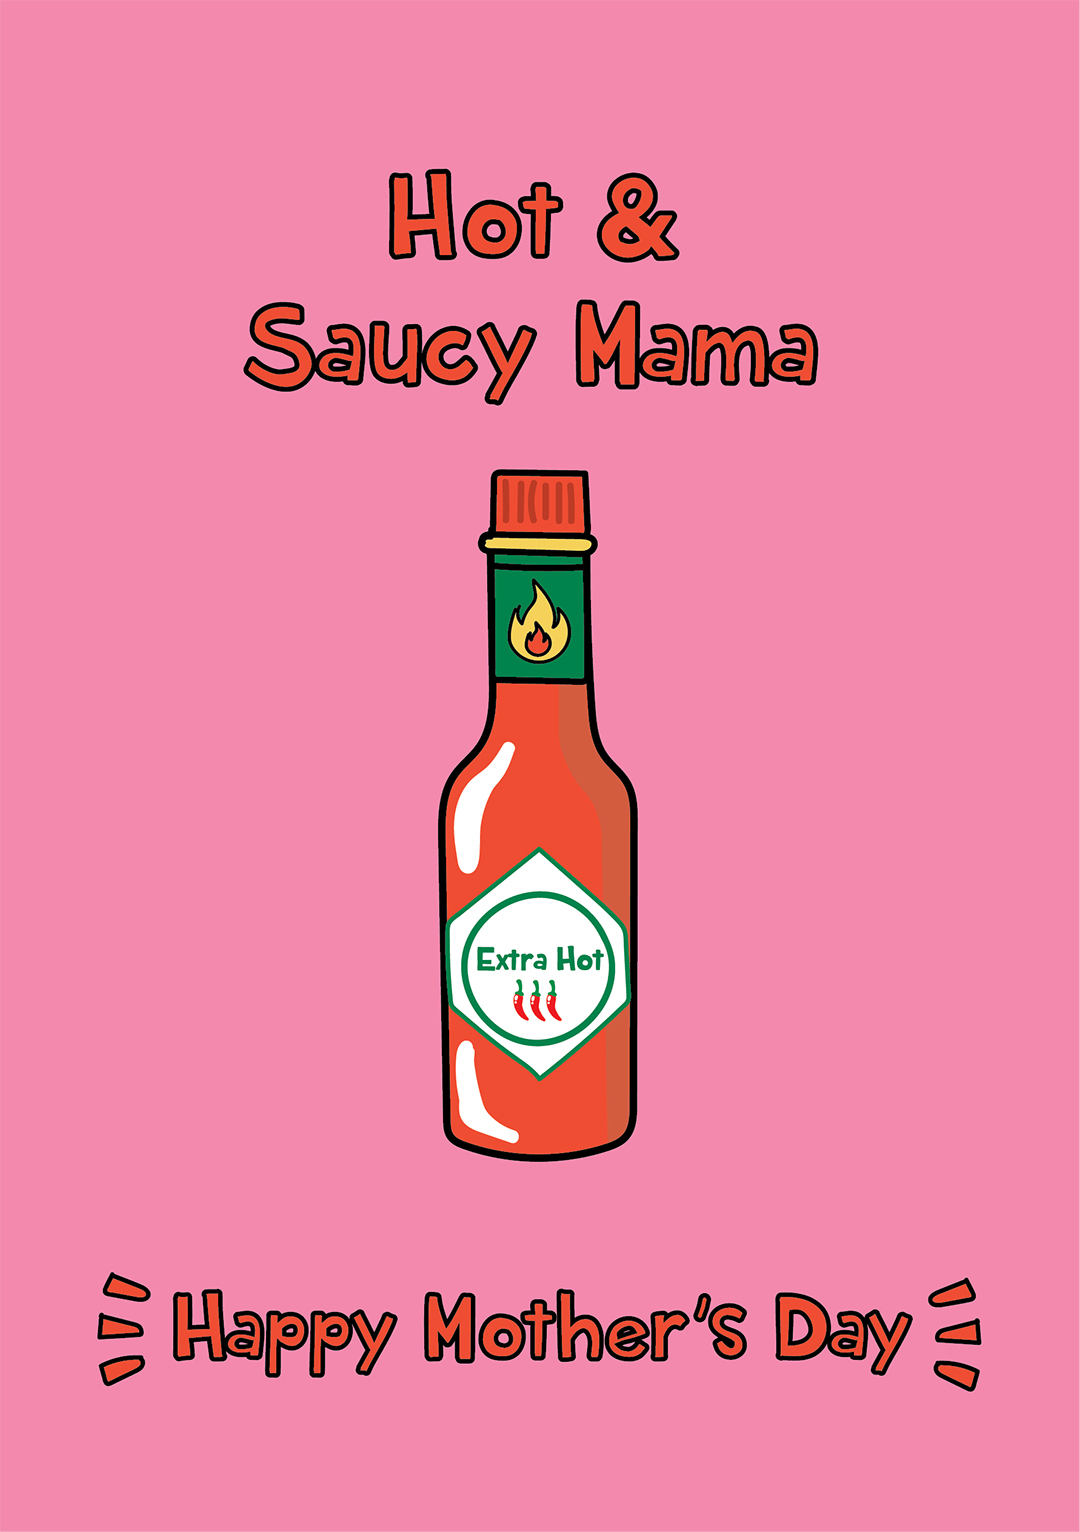 Hot & Saucy Mama - Mother's Day Card